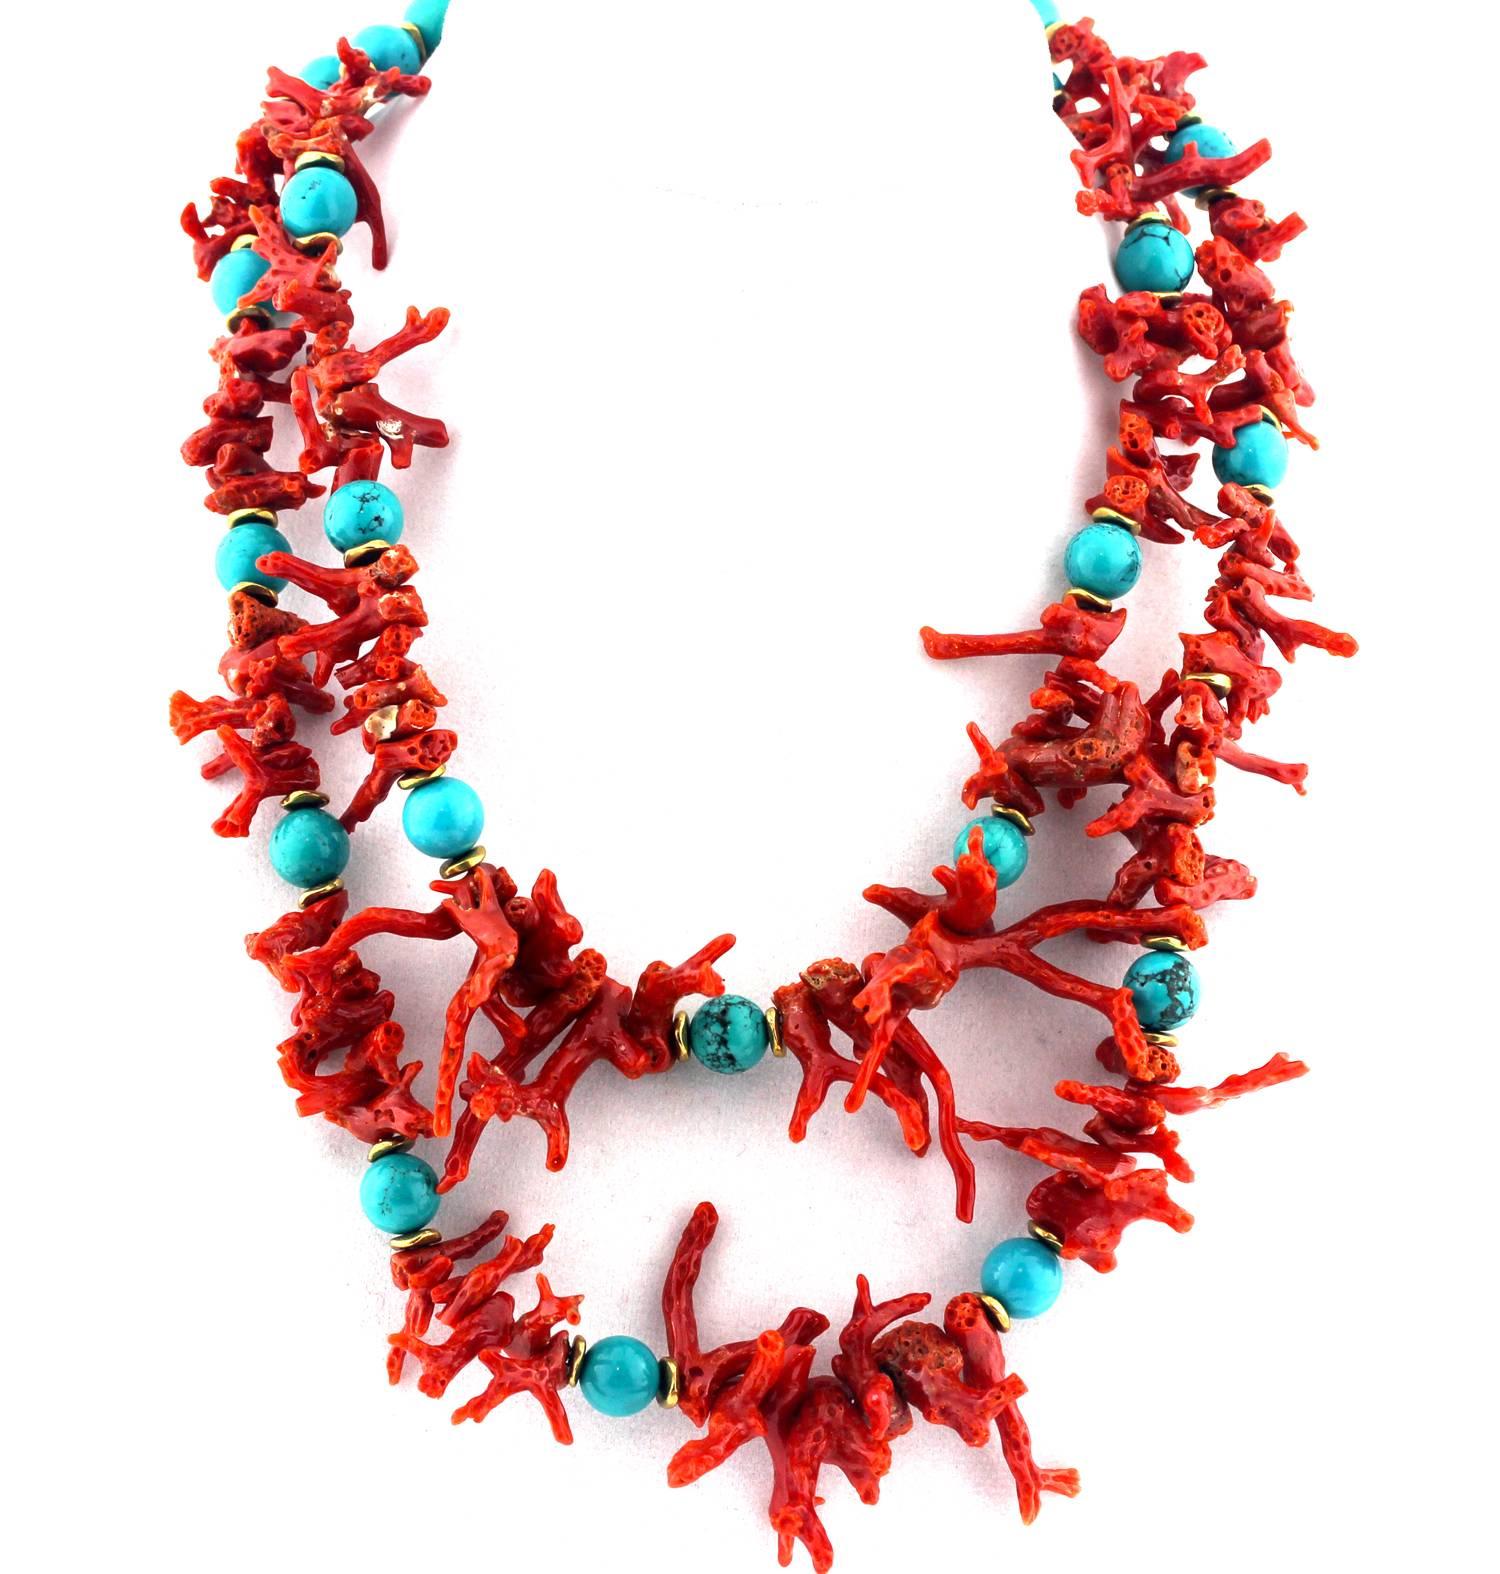 This is a Double strand choker length (16inches) necklace of unique lacy red/orangy Coral branches.  The Coral branches, which are up to 1.5 inches long, are enhanced with faux polished turquoise gems  (Magnesite Turquoise) and gold tone accents on